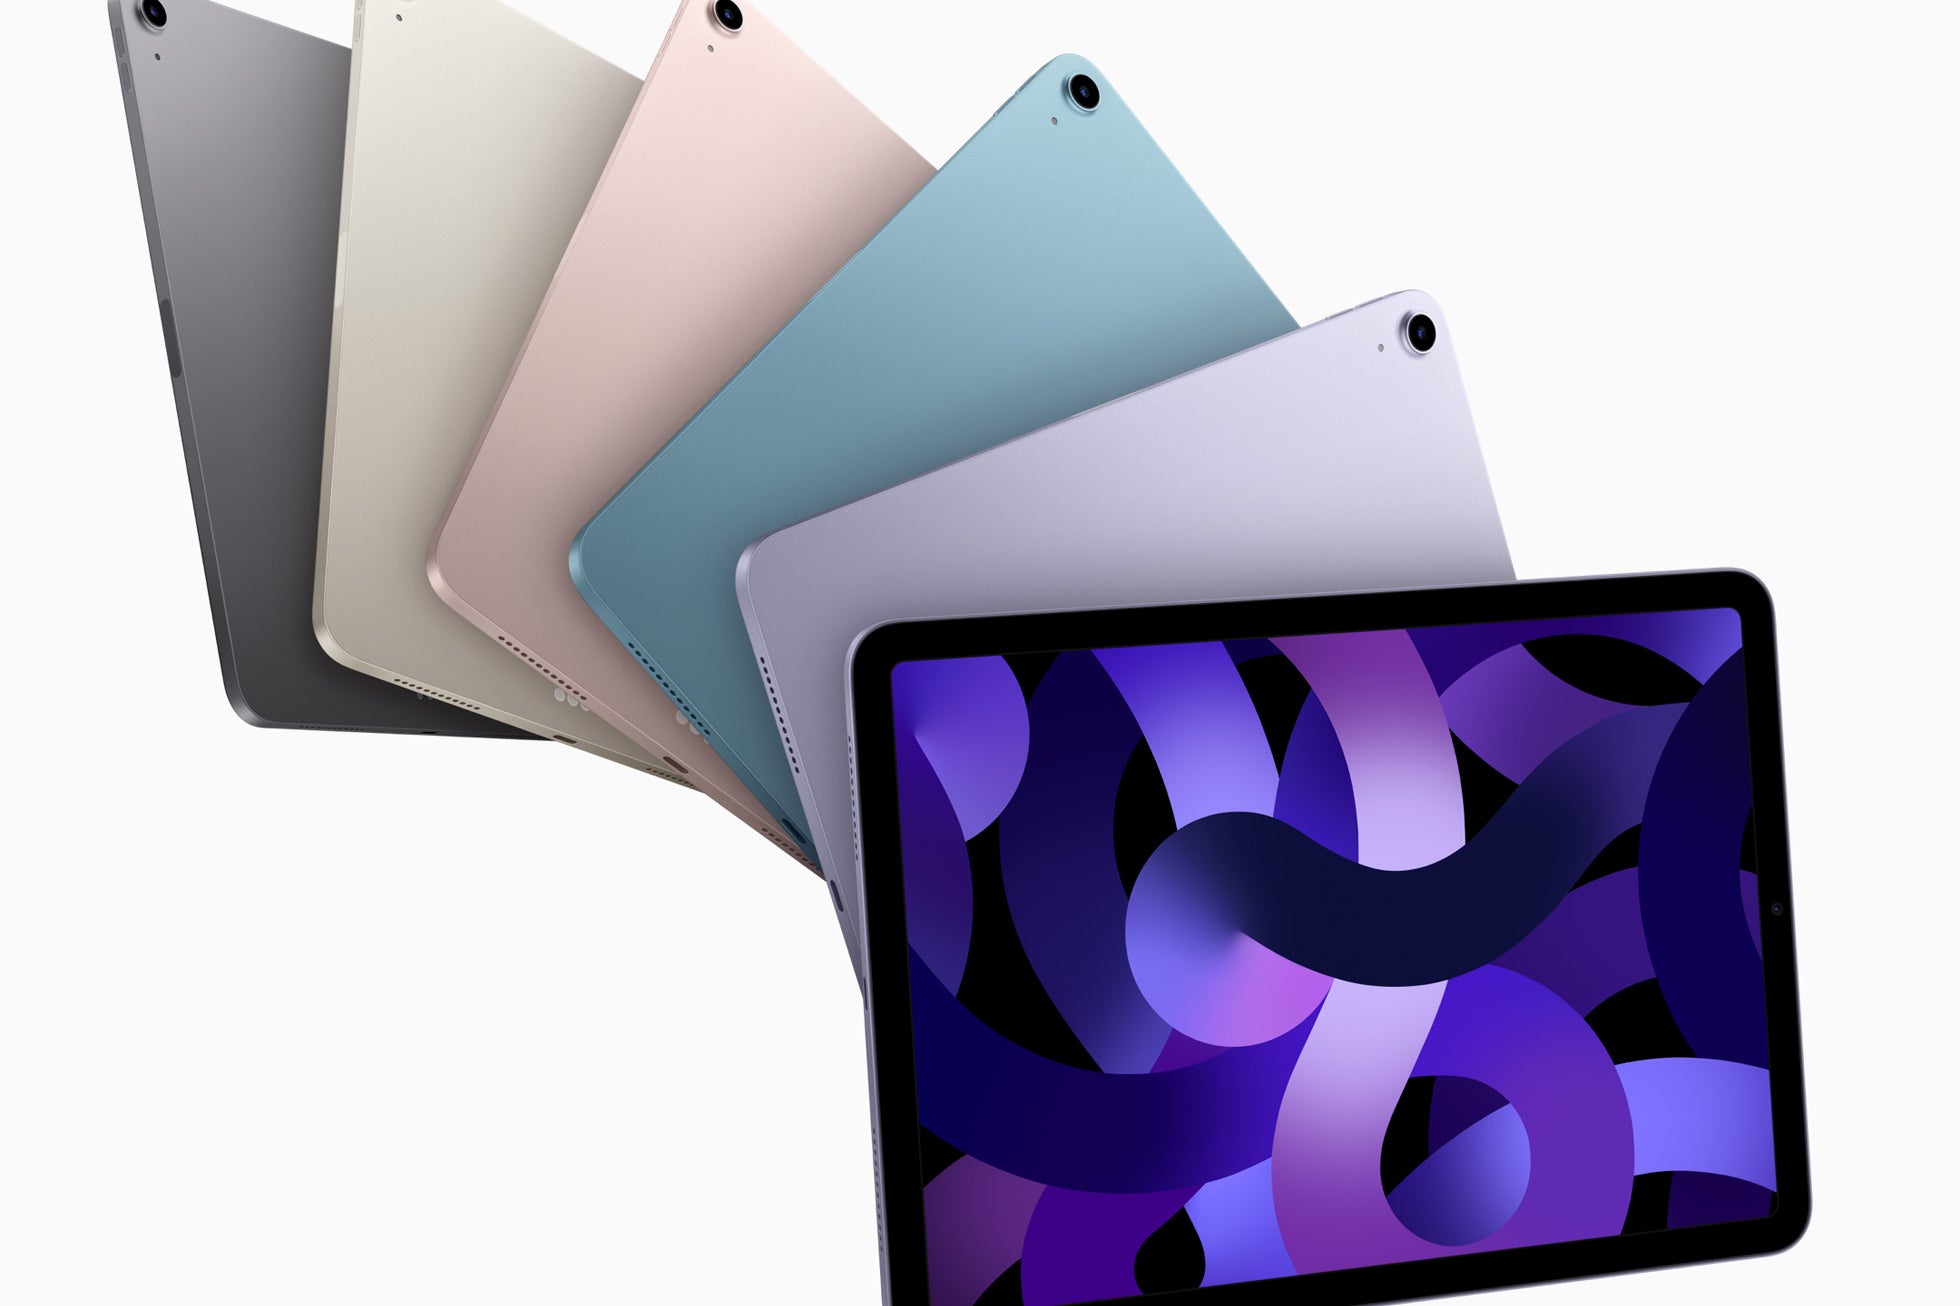 6 Apple iPad Airs in different colors.